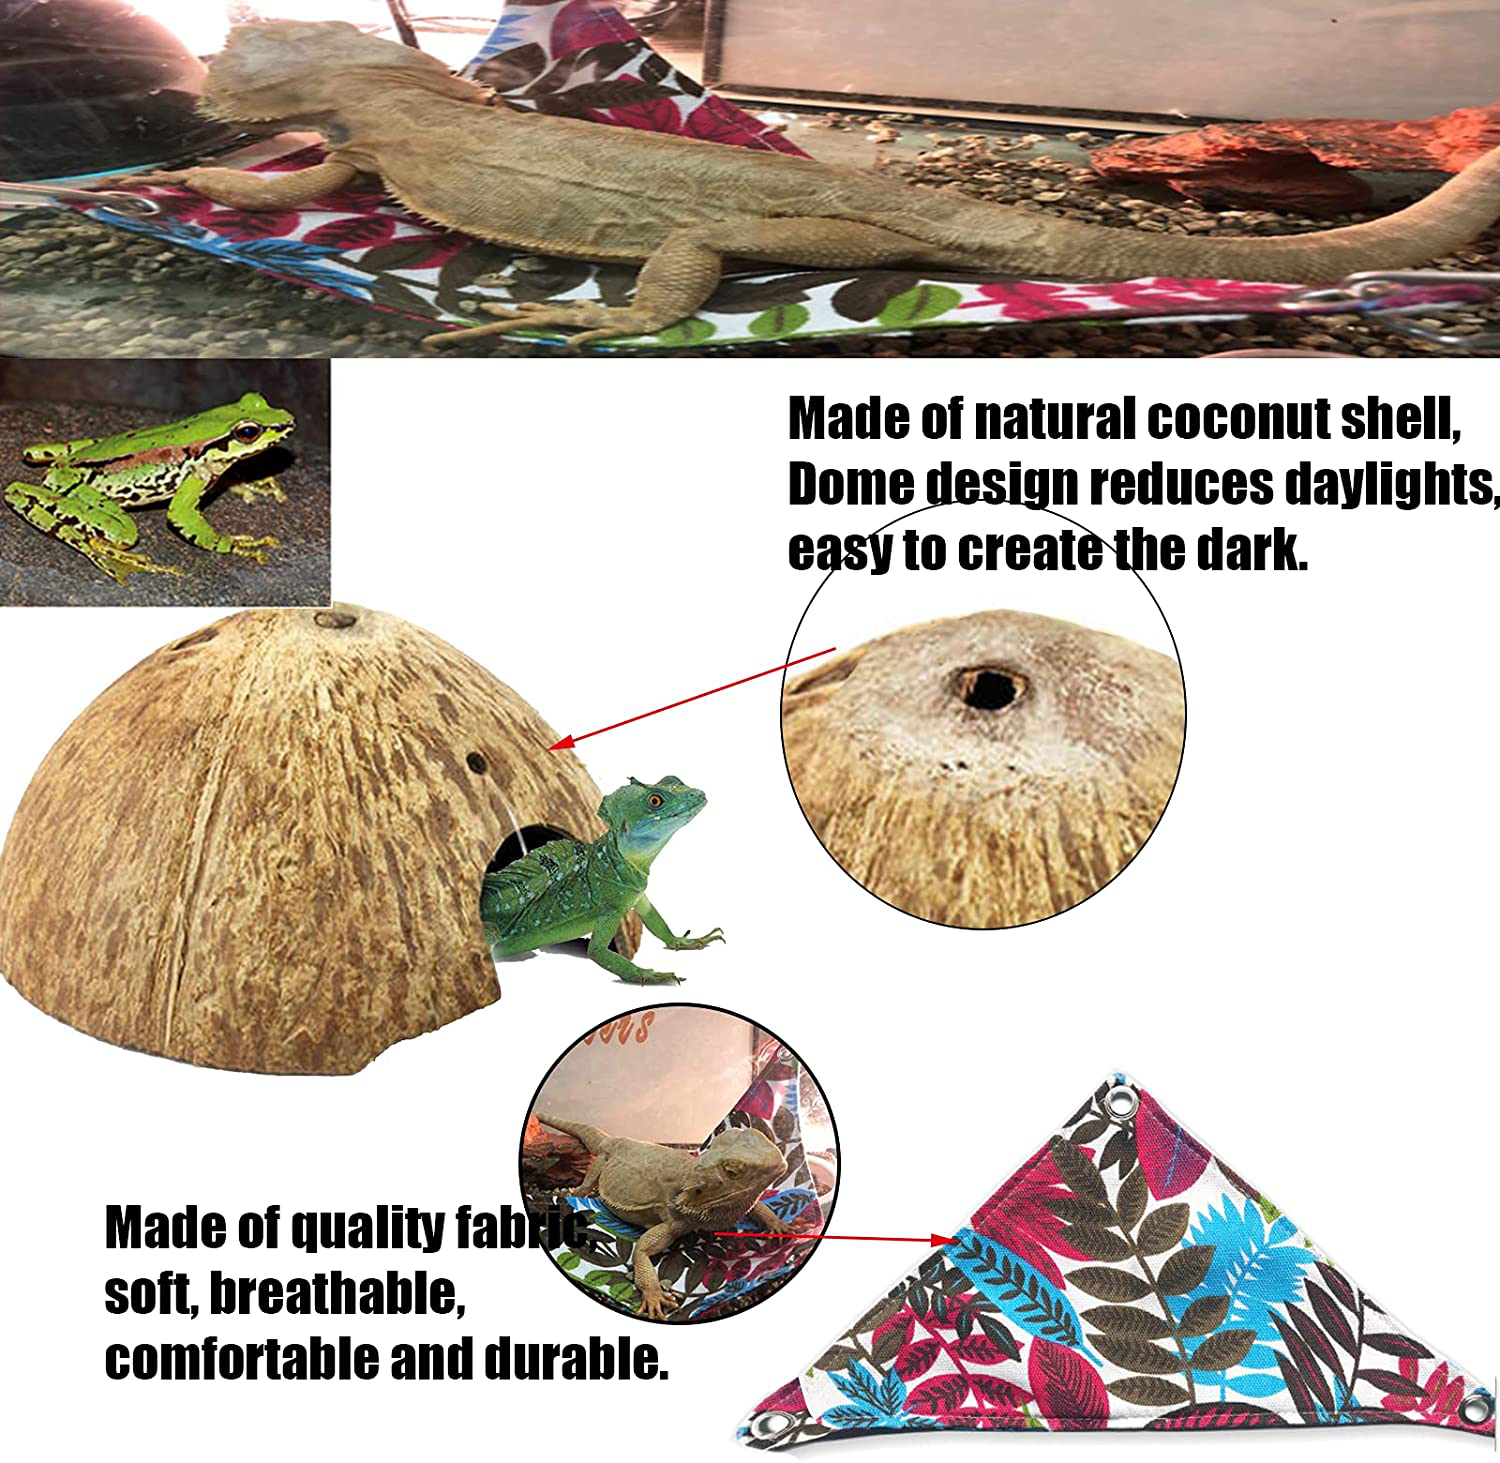 Lizard Bearded Dragon Hammock Set Tank Accessories, Coconut Shell Hut Hideout Cave Natural Seagrass Jungle Climber, Flexible Bend-A Branch Jungle Climbing Vines for Geckos and More Reptiles Perched Animals & Pet Supplies > Pet Supplies > Reptile & Amphibian Supplies > Reptile & Amphibian Habitats kathson   